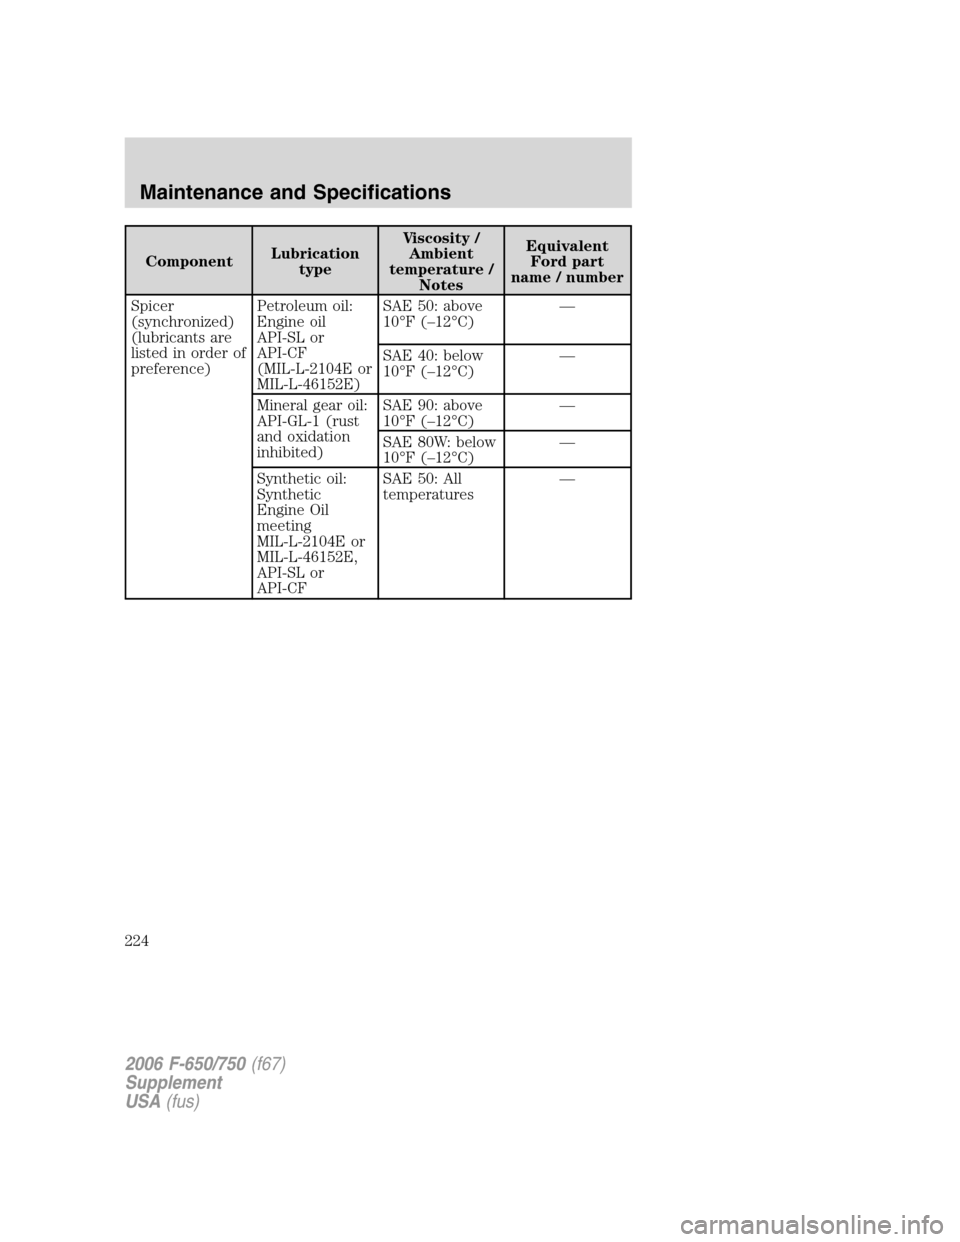 FORD F650 2006 11.G Owners Manual ComponentLubrication
typeViscosity /
Ambient
temperature /
NotesEquivalent
Ford part
name / number
Spicer
(synchronized)
(lubricants are
listed in order of
preference)Petroleum oil:
Engine oil
API-SL 